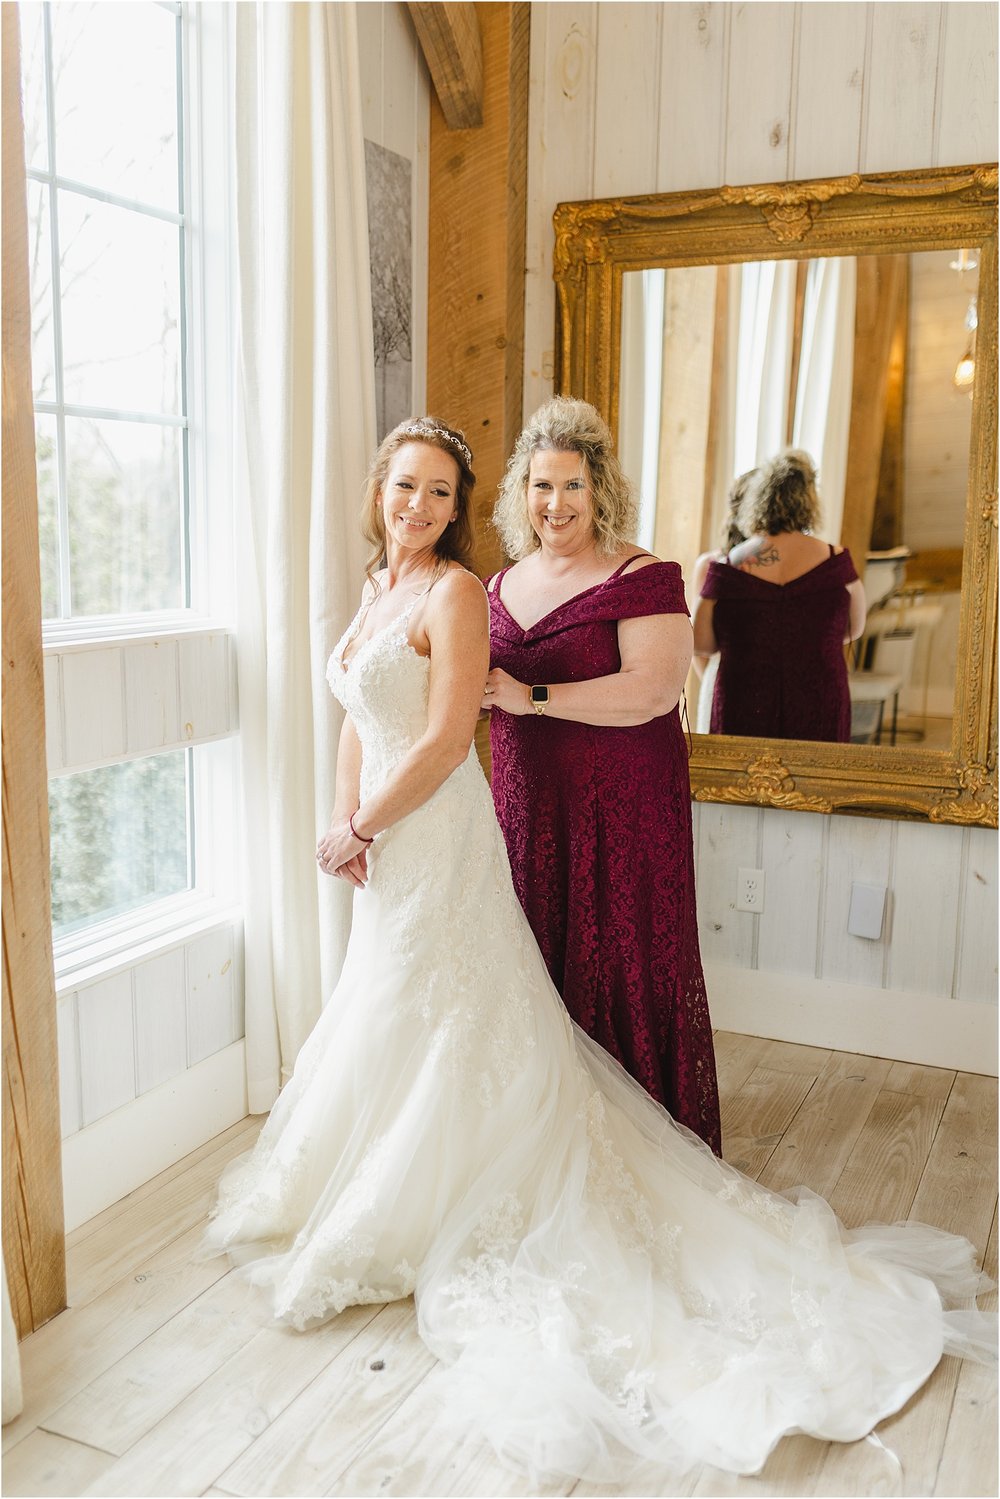 Maid of Honor Helping Bride Get Into Wedding Dress